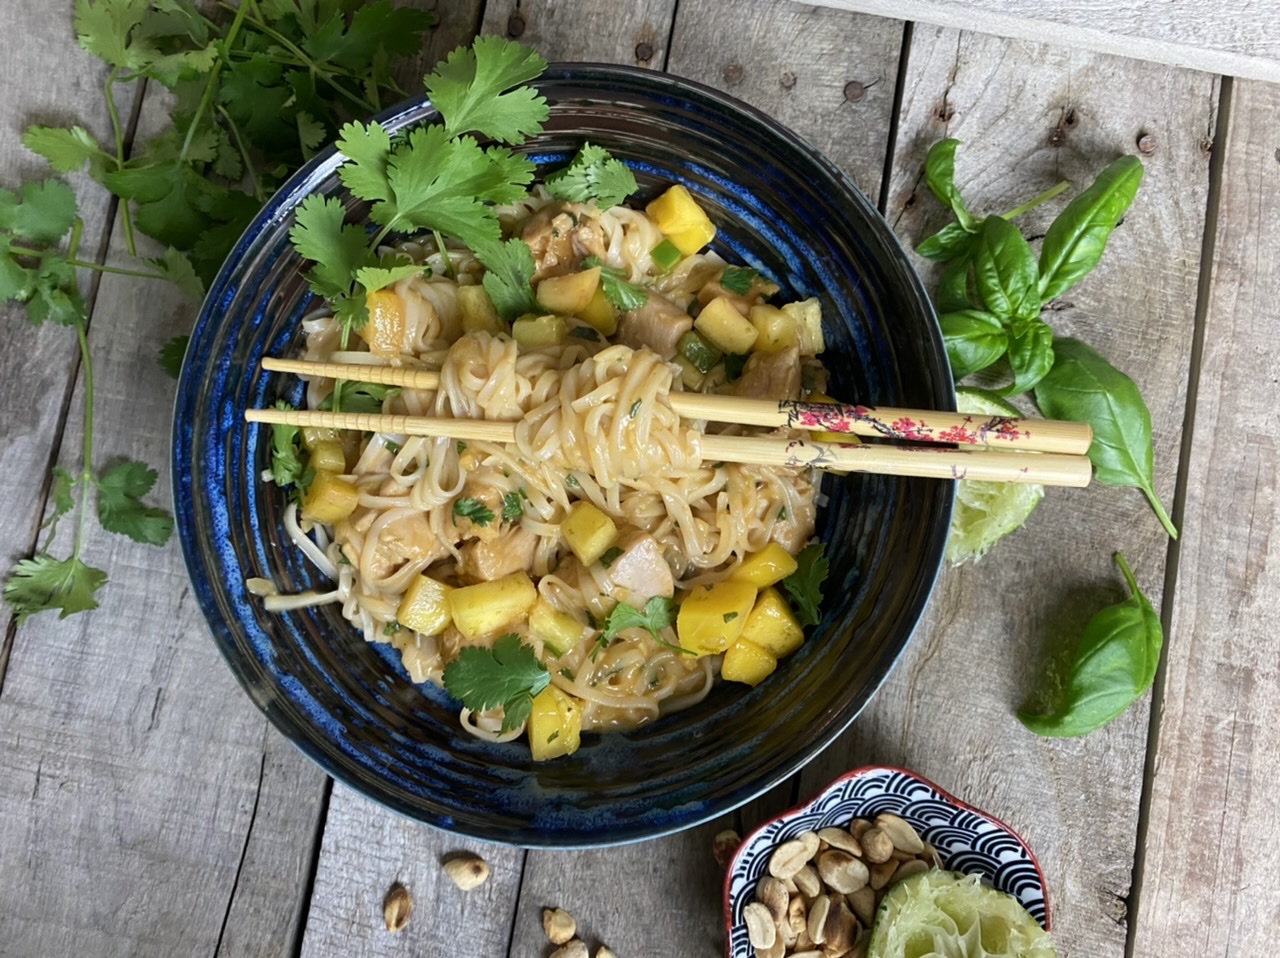 6BF11489 09DC 4F8D 8CEF 3F8D36A2330A - Thai Peanut Chicken Rice Noodles with Spicy Mango Salsa